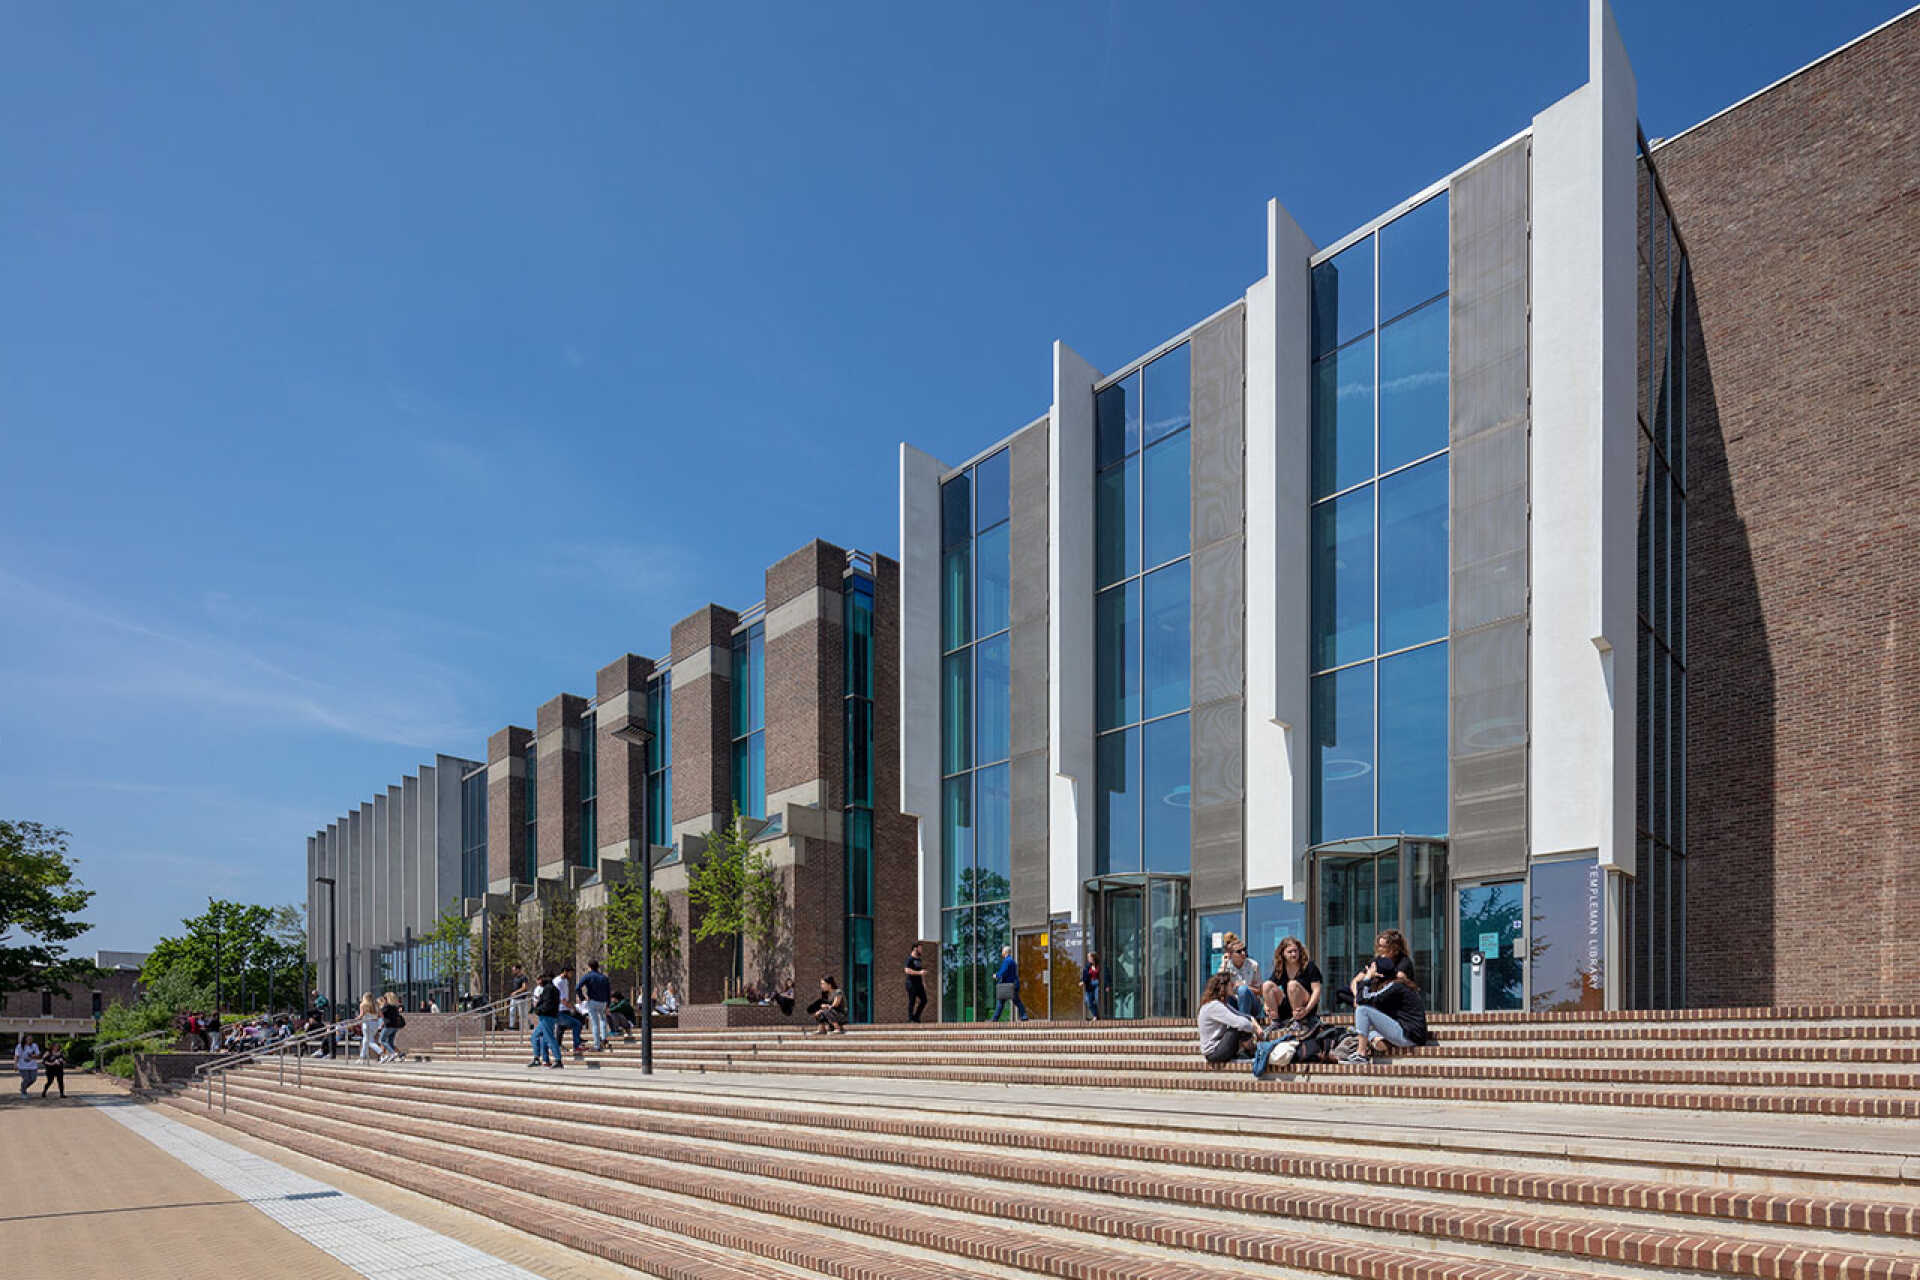 Templeman Library Library and IT University of Kent